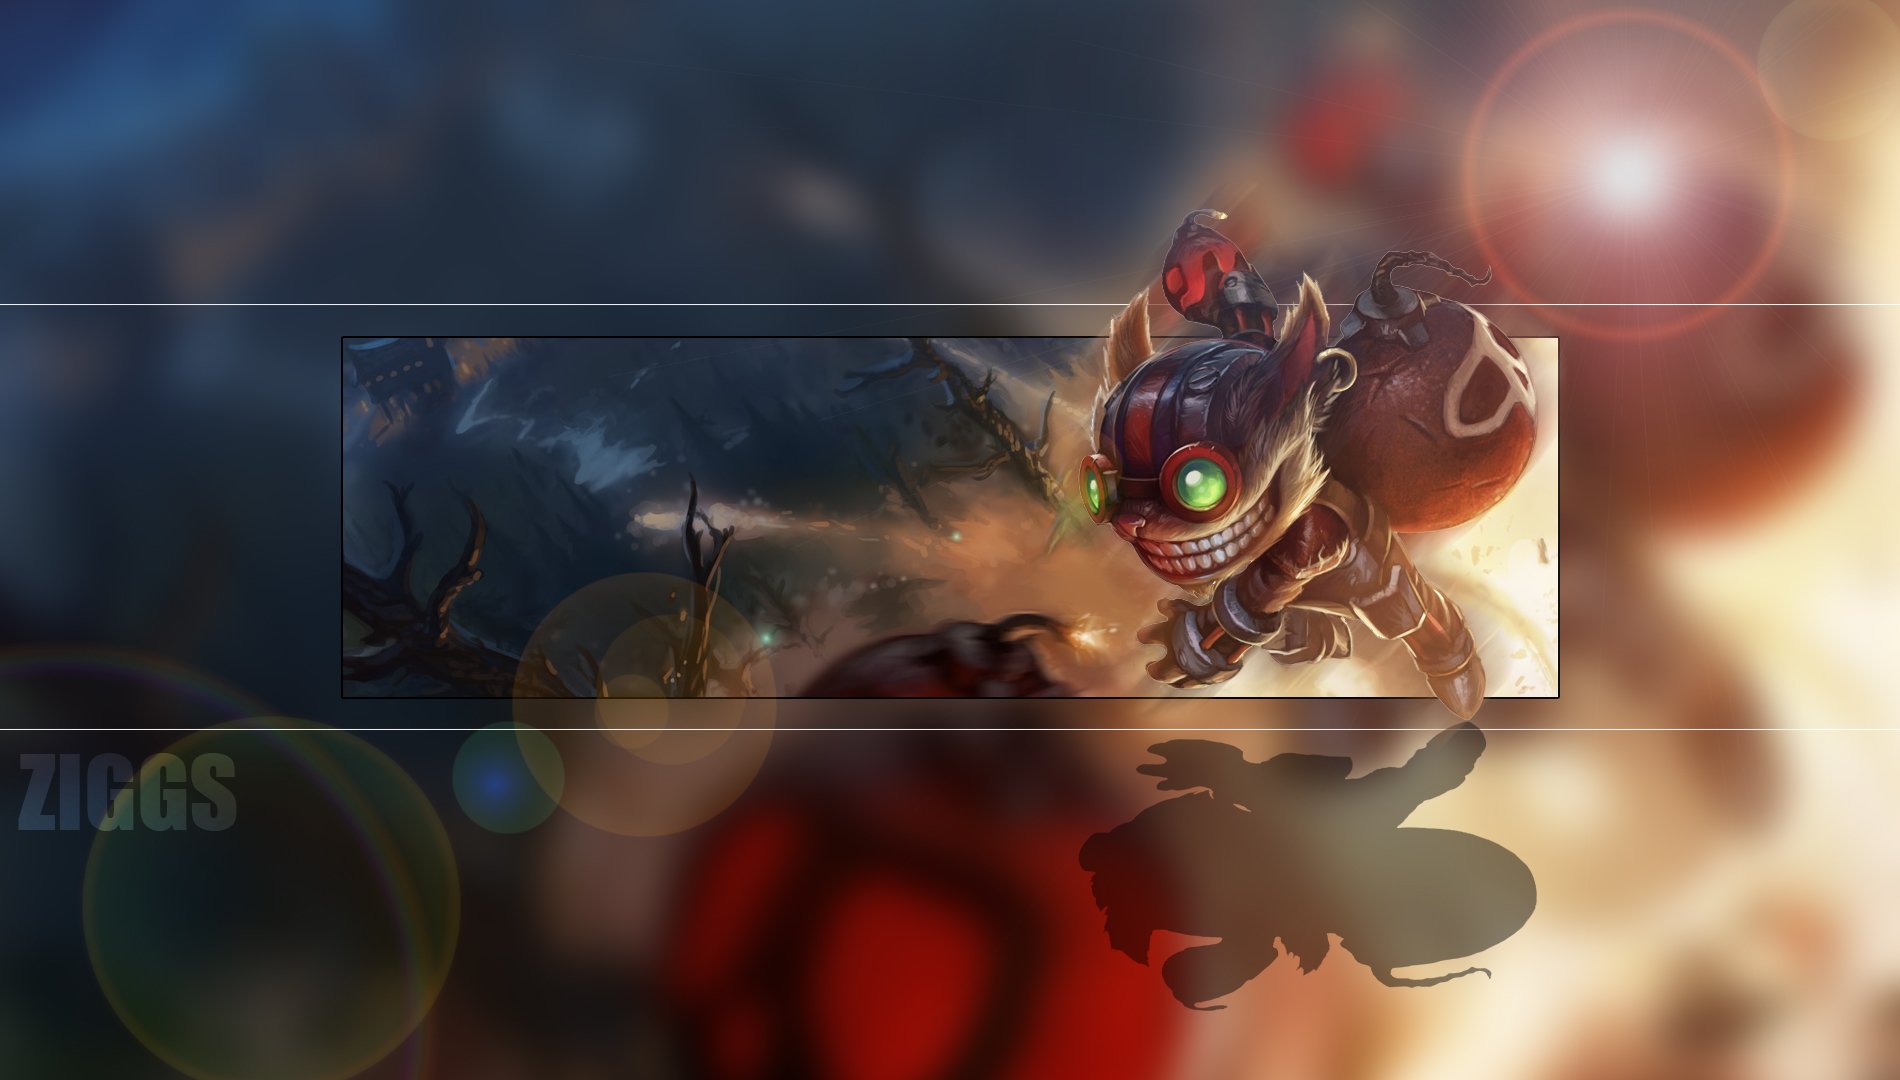 Ziggs Wallpaper And Background Image Id